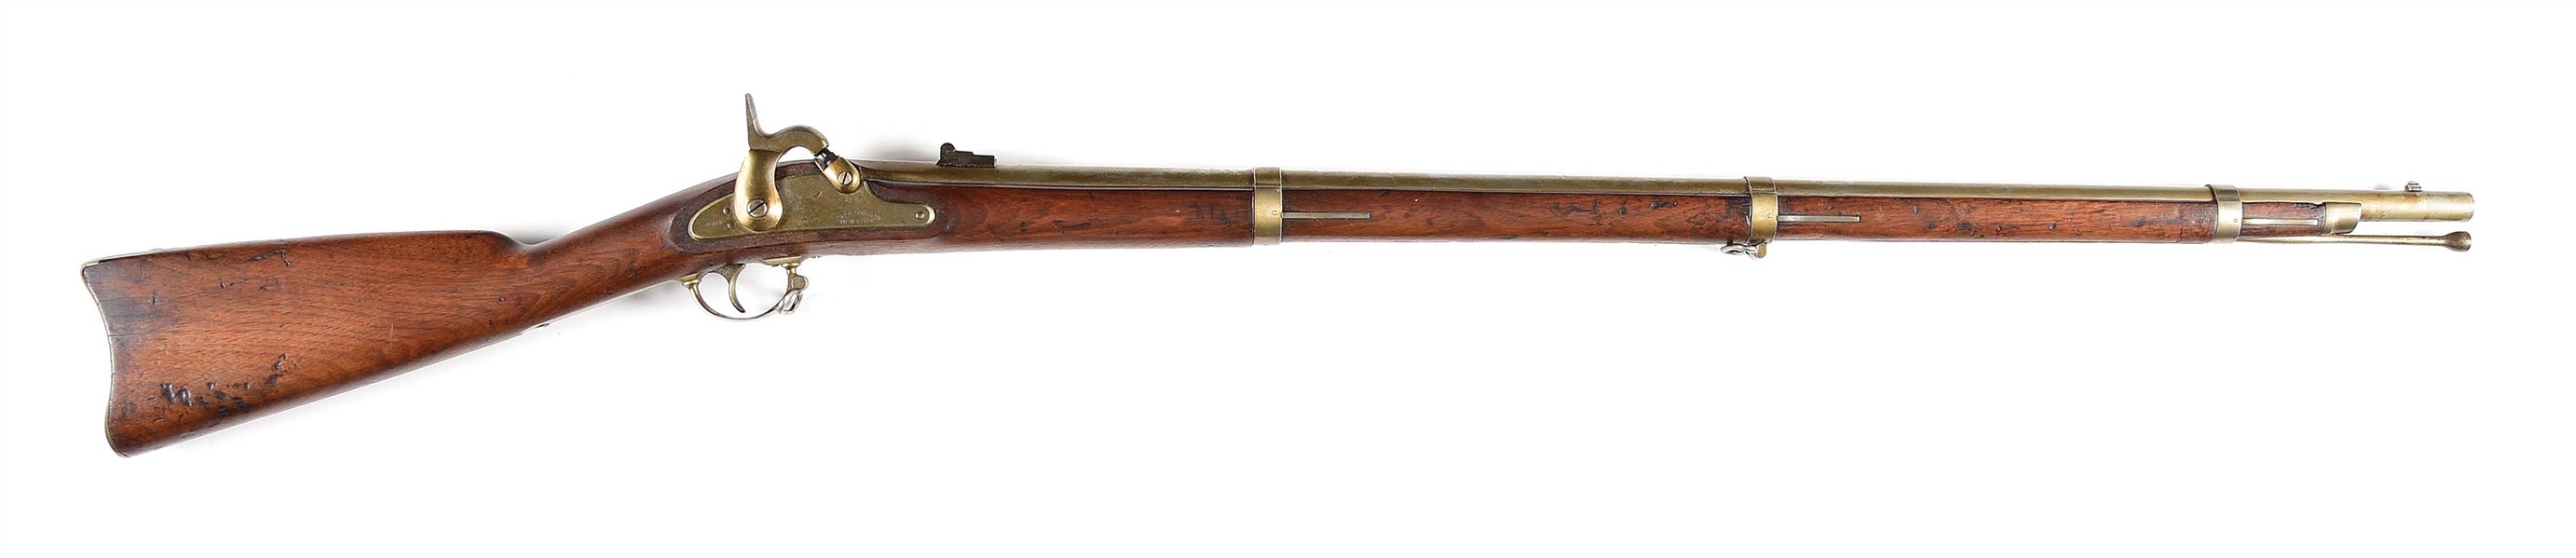 (A) FINE AND SCARCE E. ROBINSON NEW YORK MODEL 1861 .58 CALIBER CONTRACT RIFLED MUSKET DATED 1864.